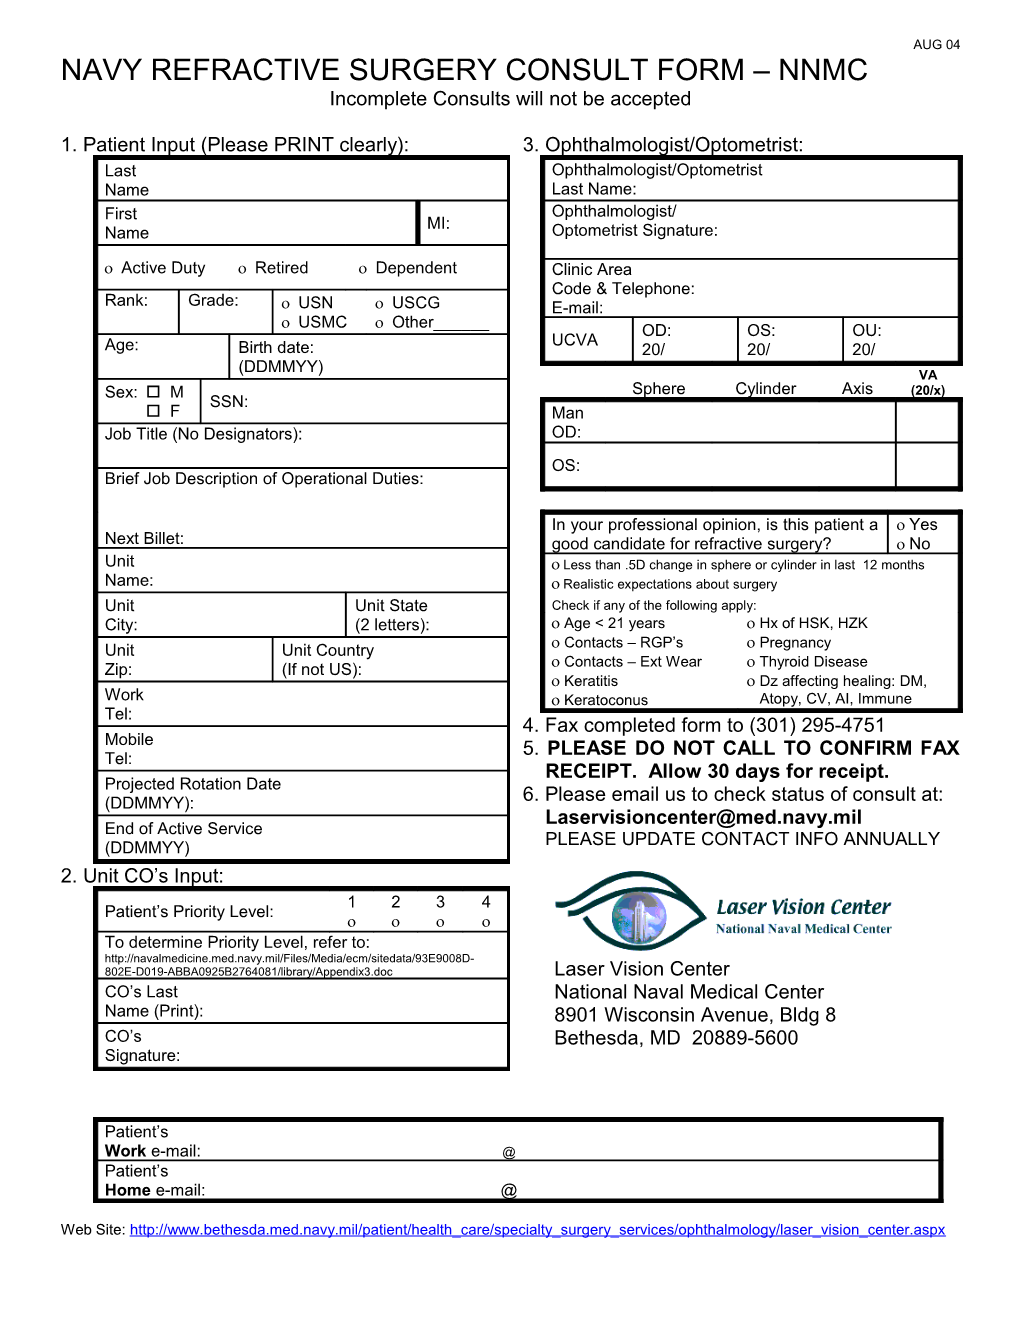 NNMC Refractive Surgery Consult Worksheet